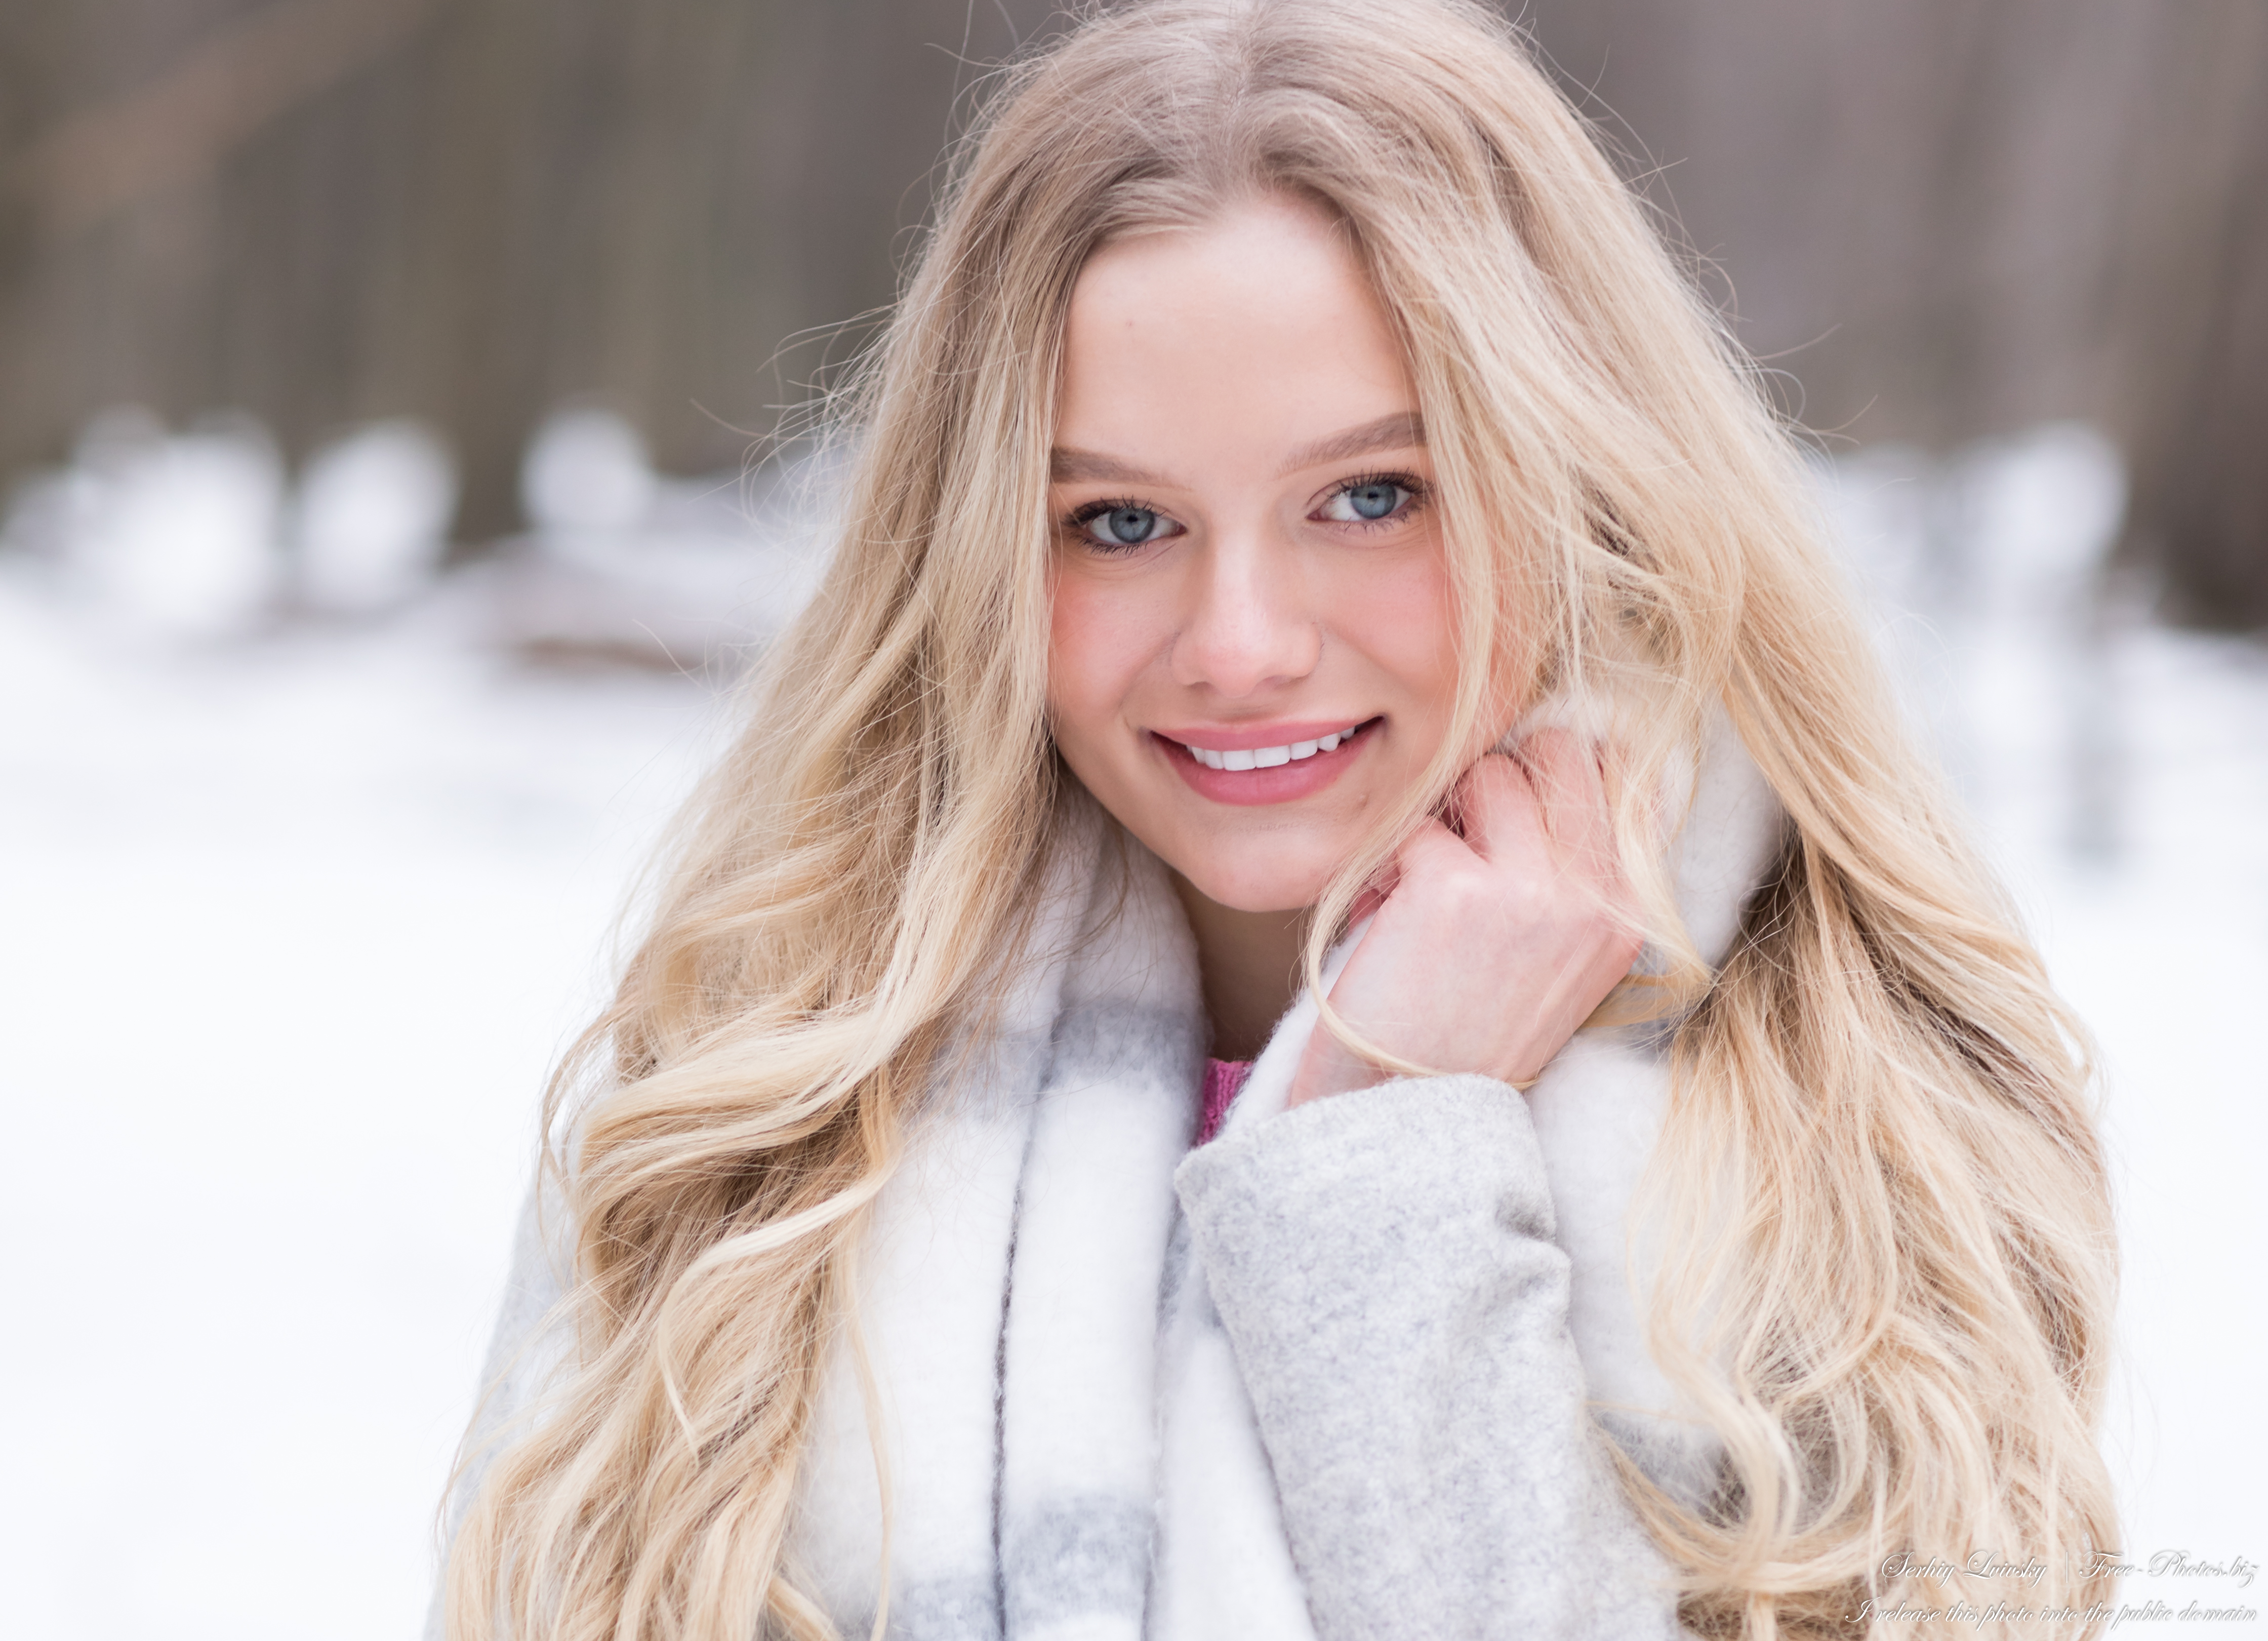 Oksana - a 19-year-old natural blonde girl photographed by Serhiy Lvivsky in March 2021, picture 35